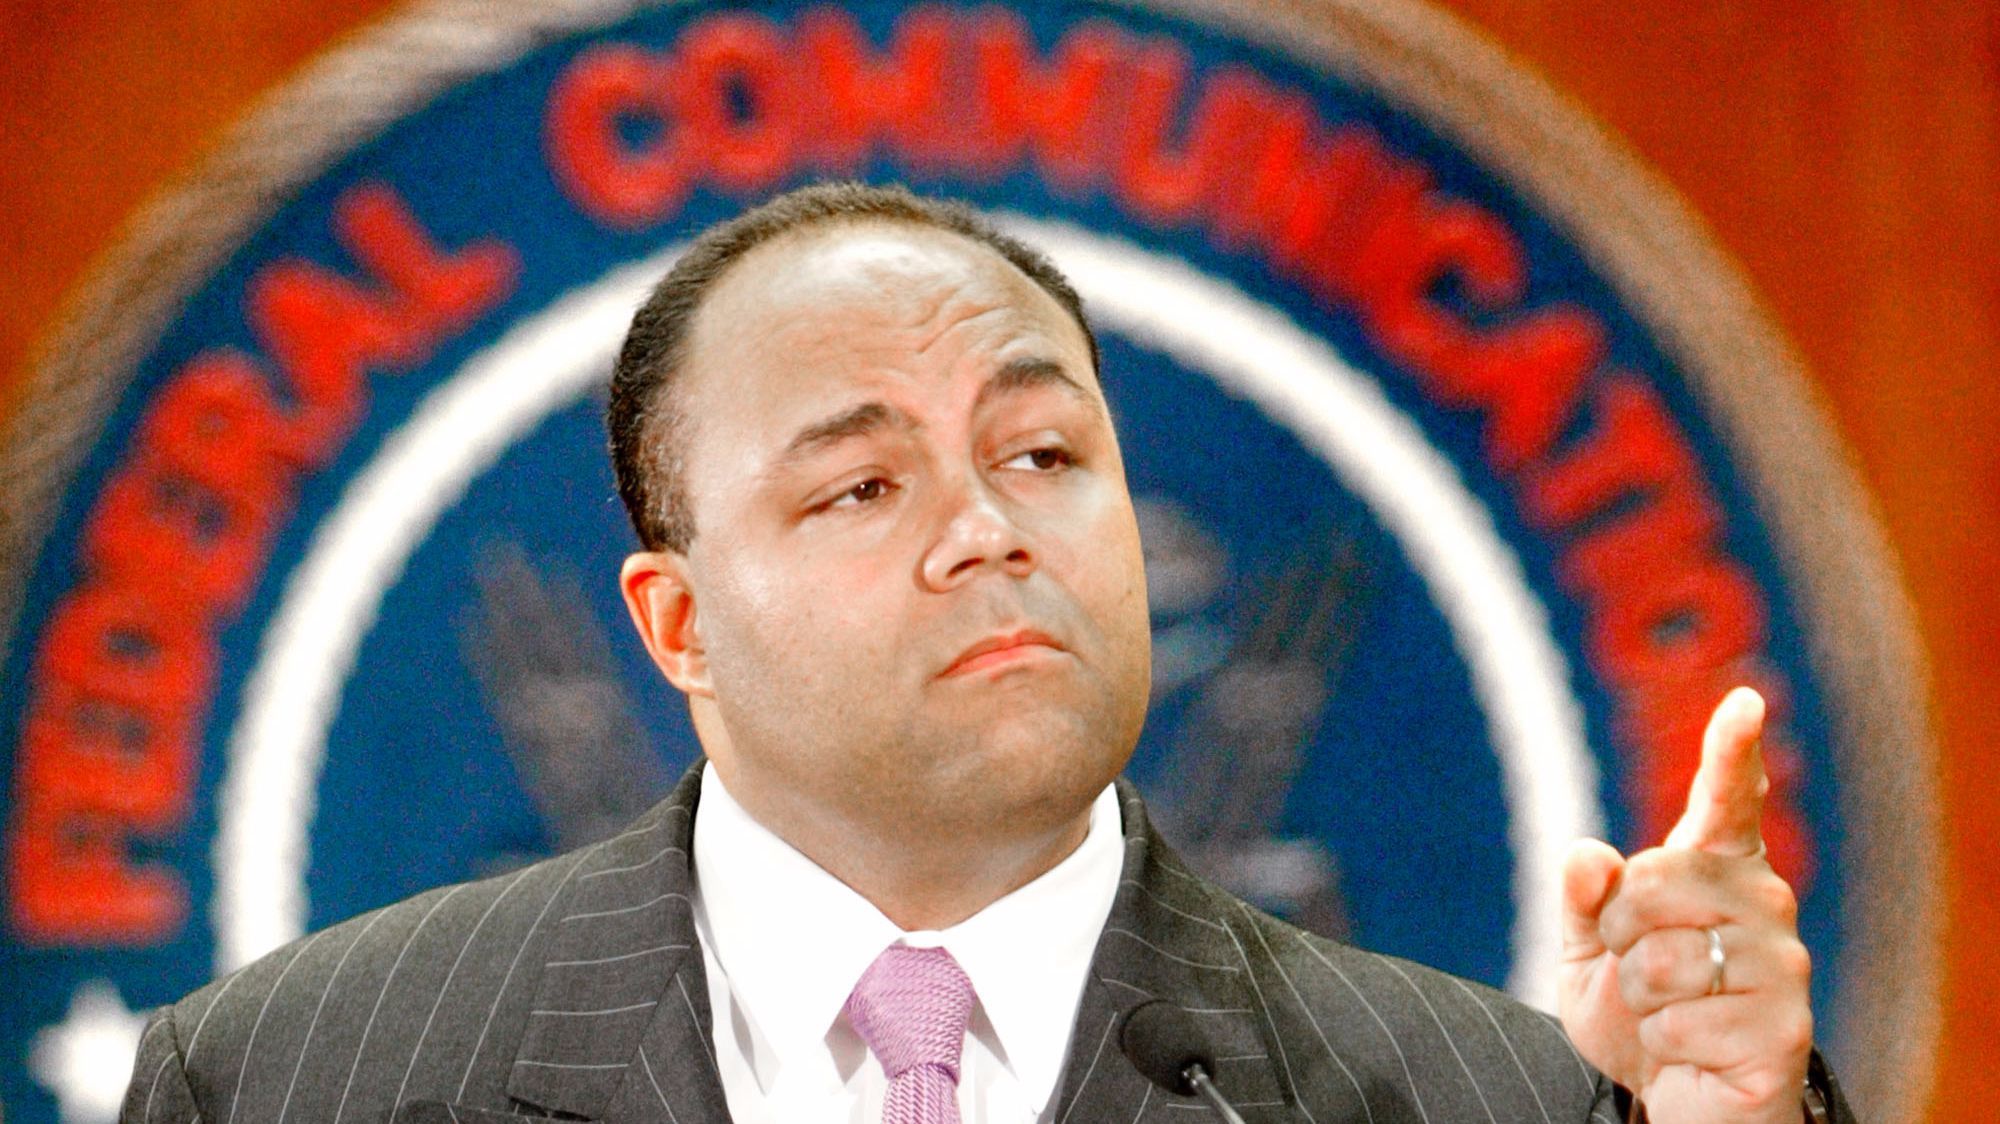 Federal Communications Commission Chairman Michael Powell gestures during a 2003 news conference